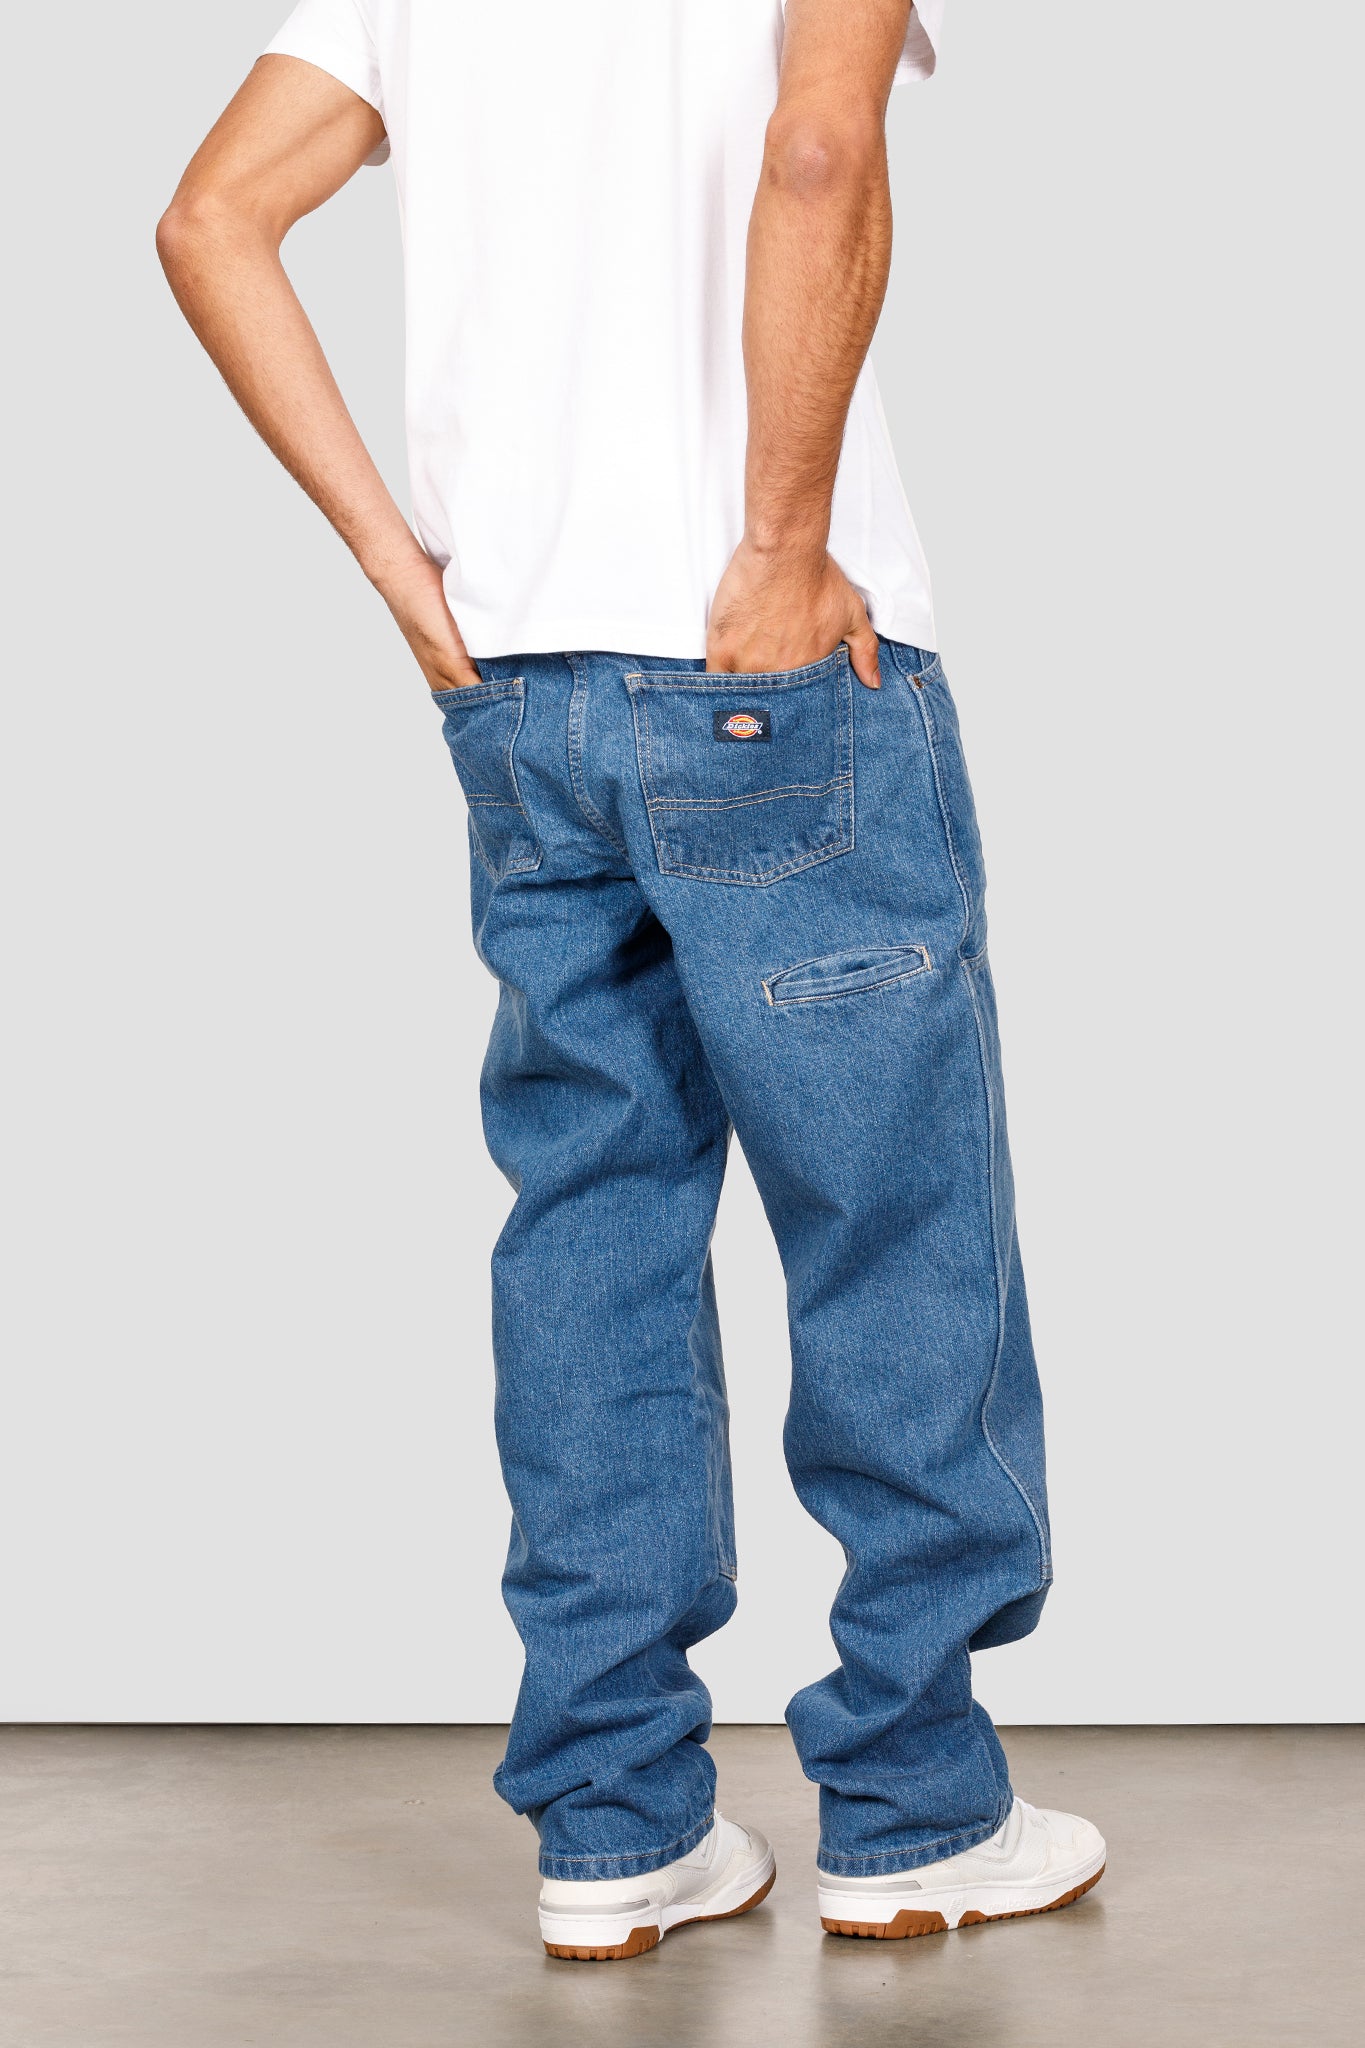 Relaxed Fit Double Knee Jeans Denim Dickies   